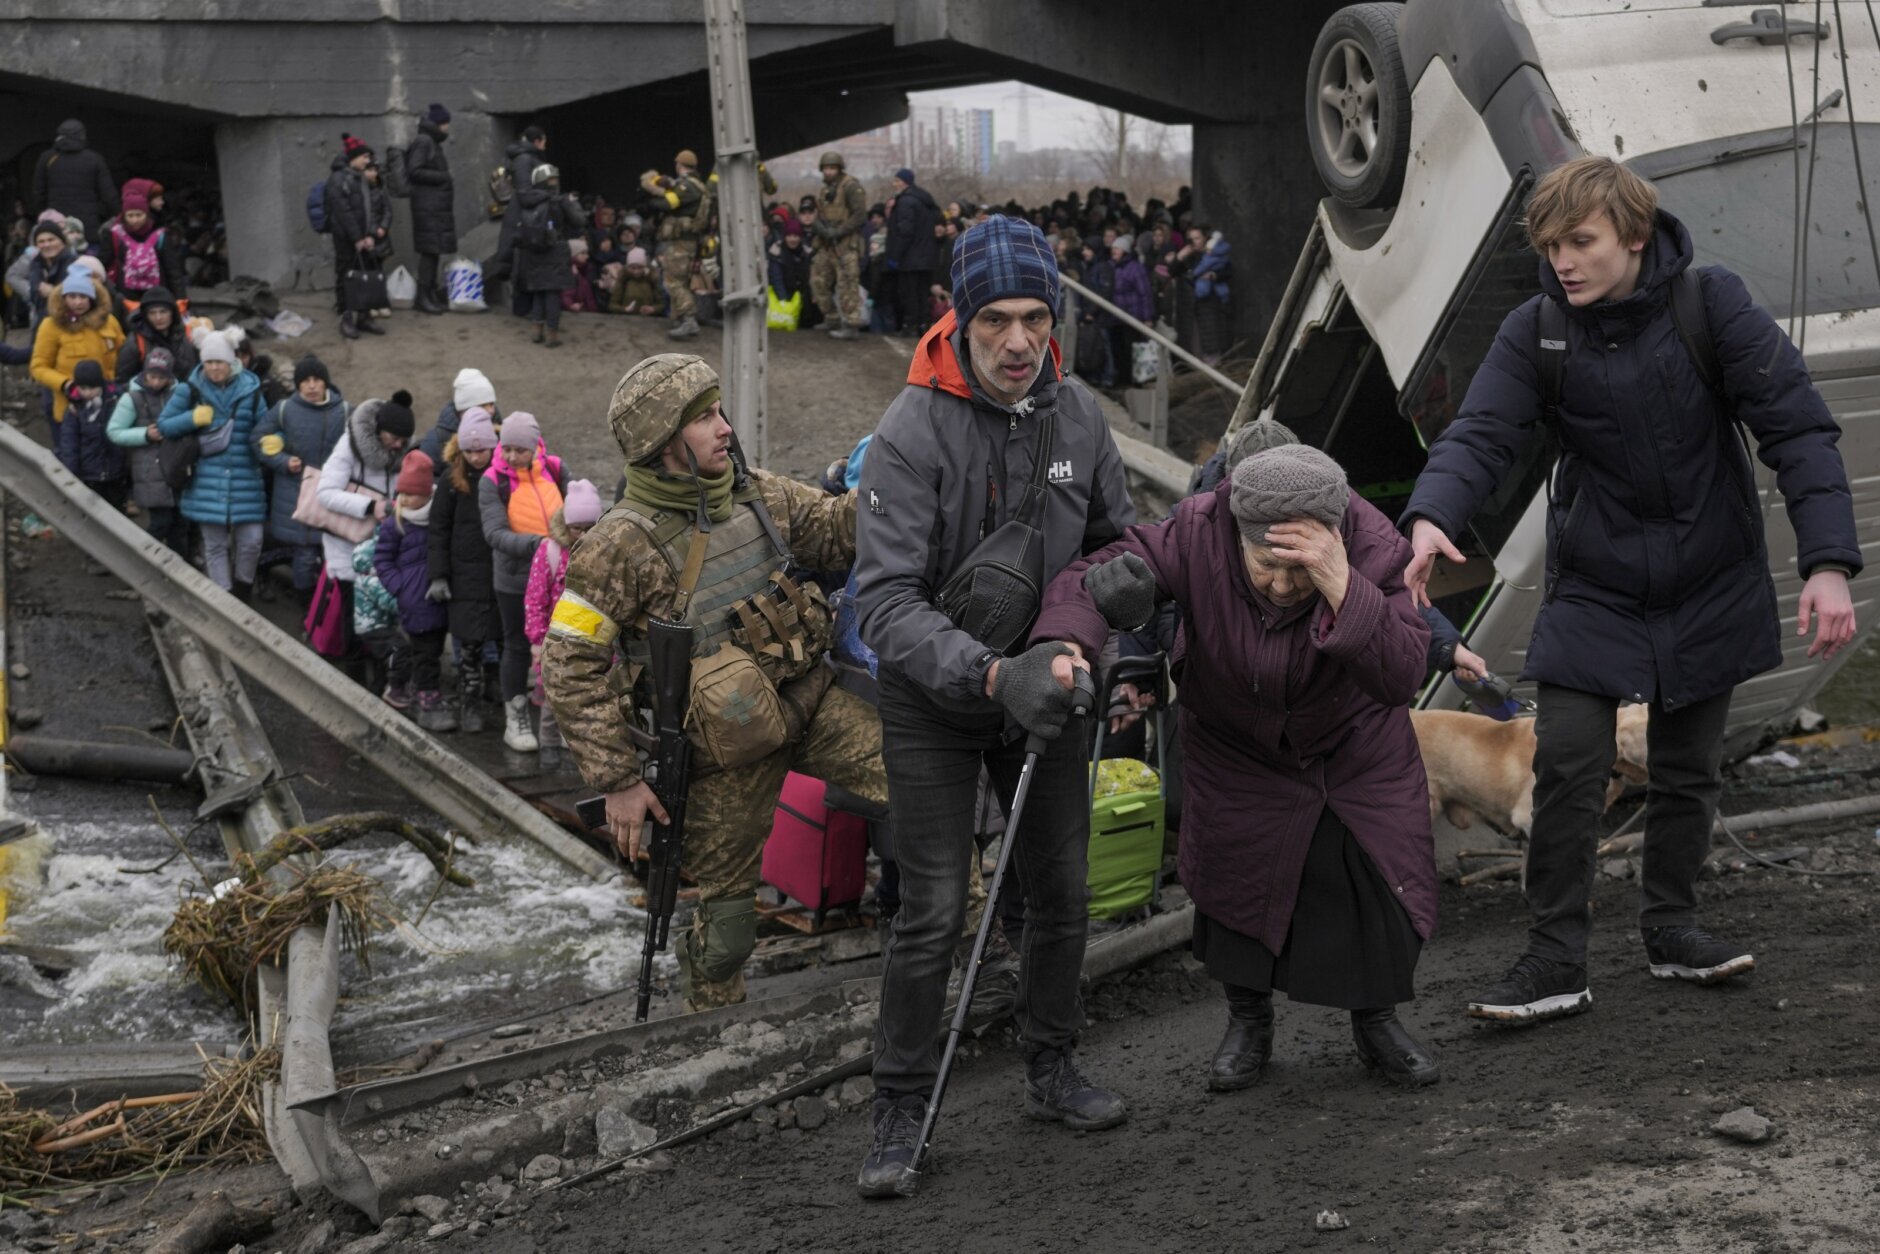 An elderly lady gets assisted while crossing the Irpin river, under a bridge that was destroyed, as civilians flee the town of Irpin, Ukraine, Saturday, March 5, 2022. (AP Photo/Vadim Ghirda)